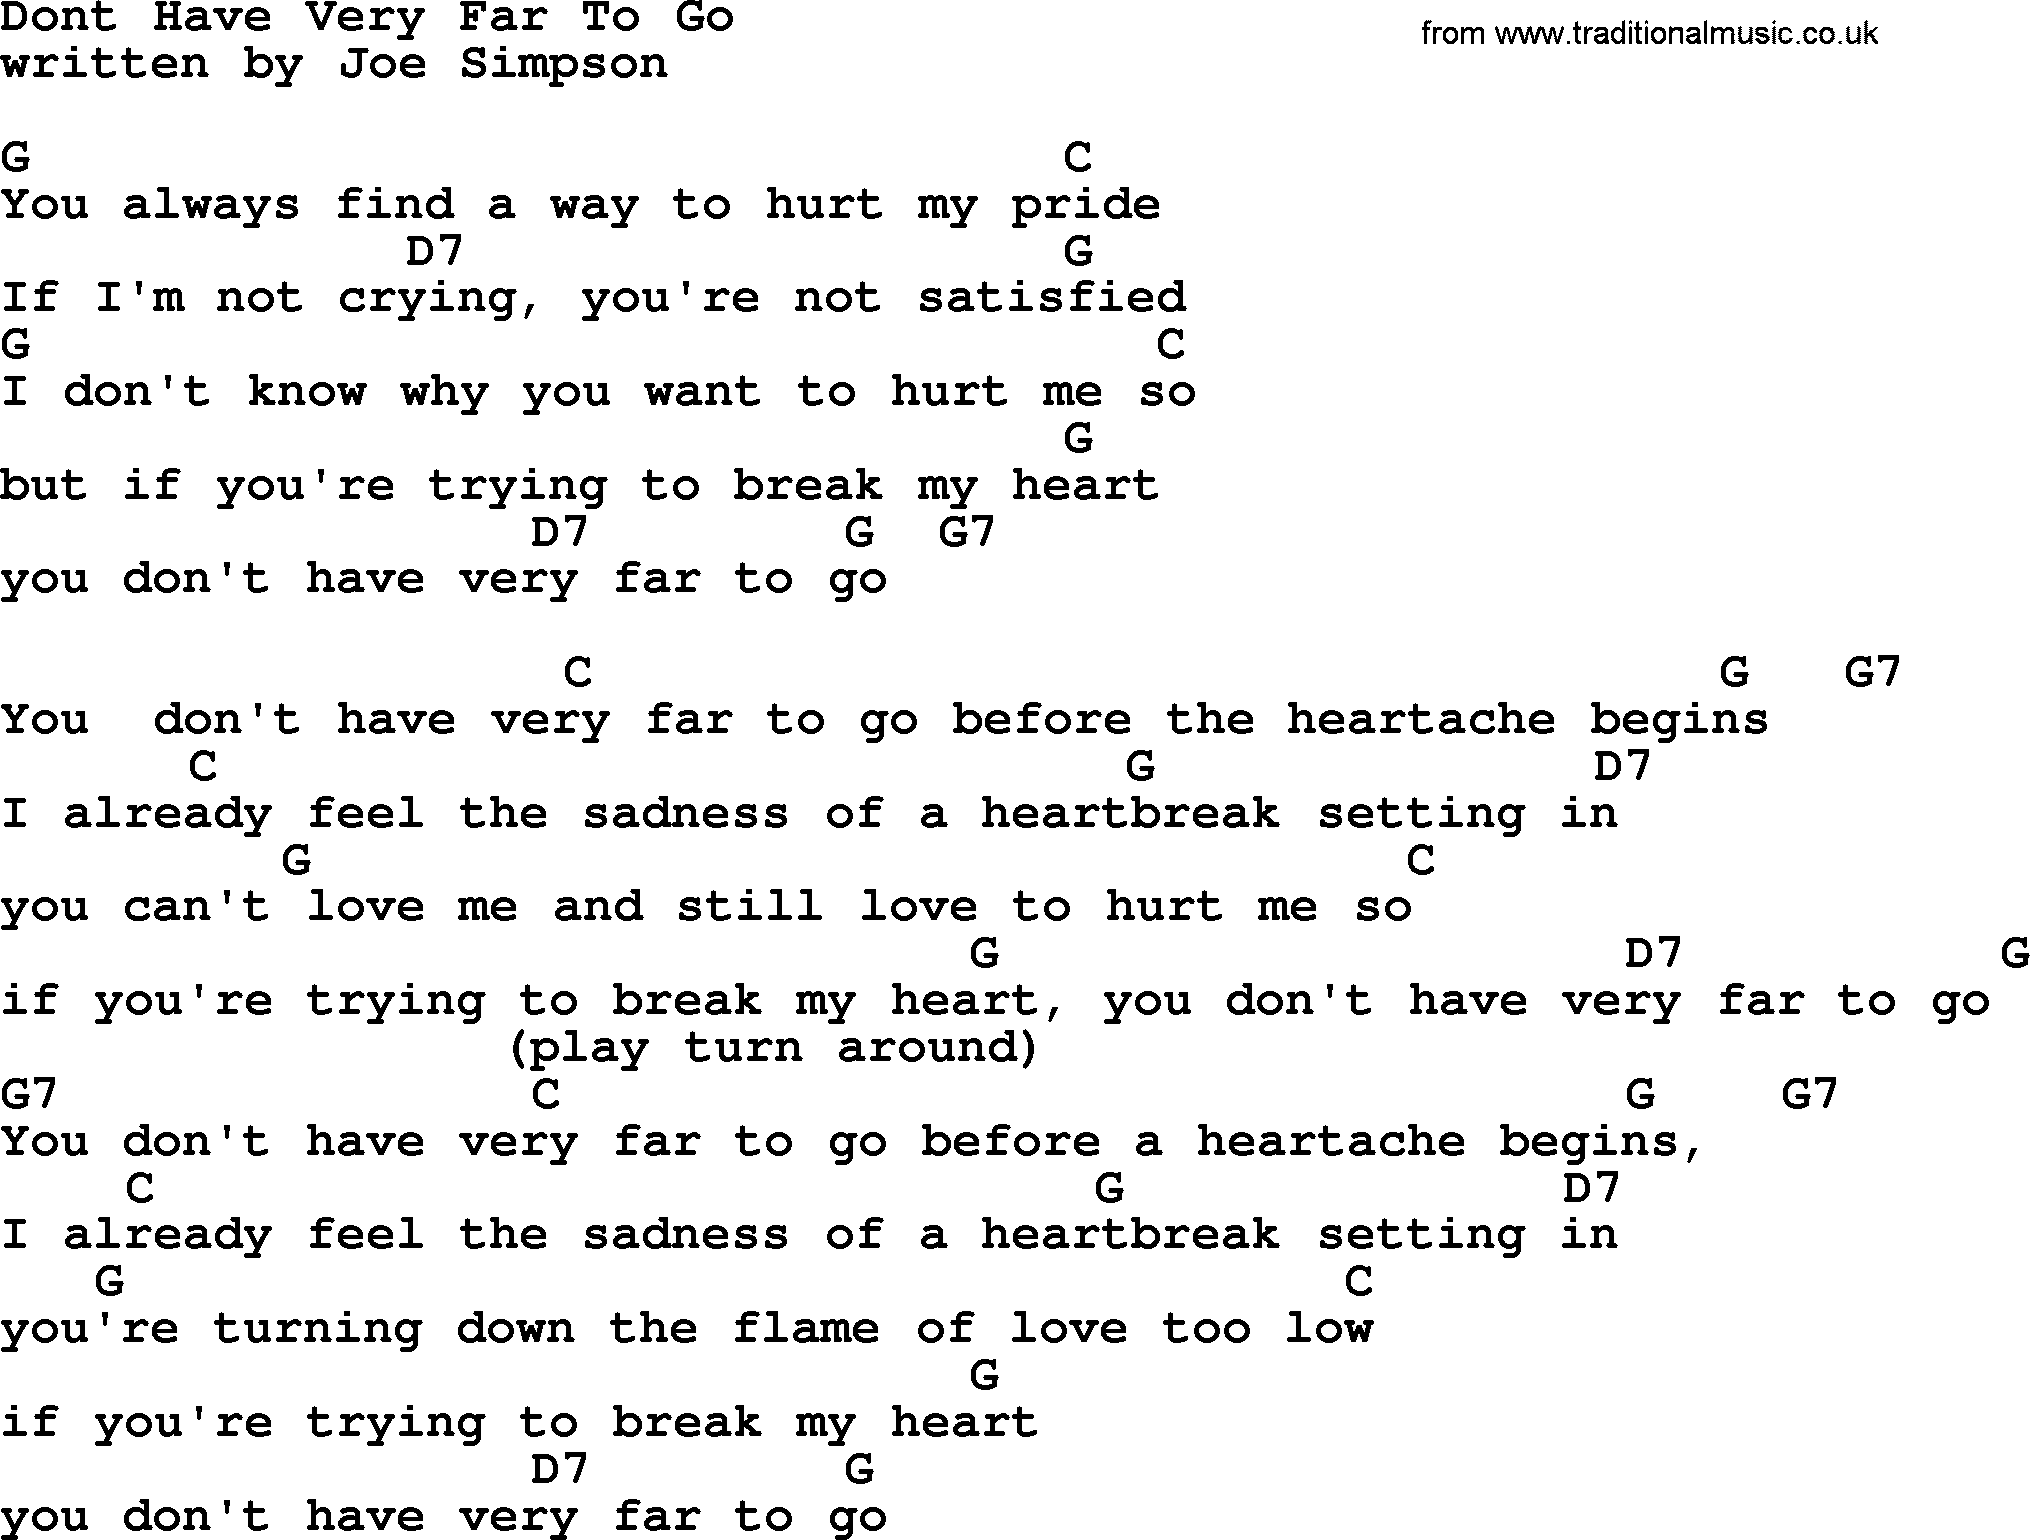 Merle Haggard song: Dont Have Very Far To Go, lyrics and chords